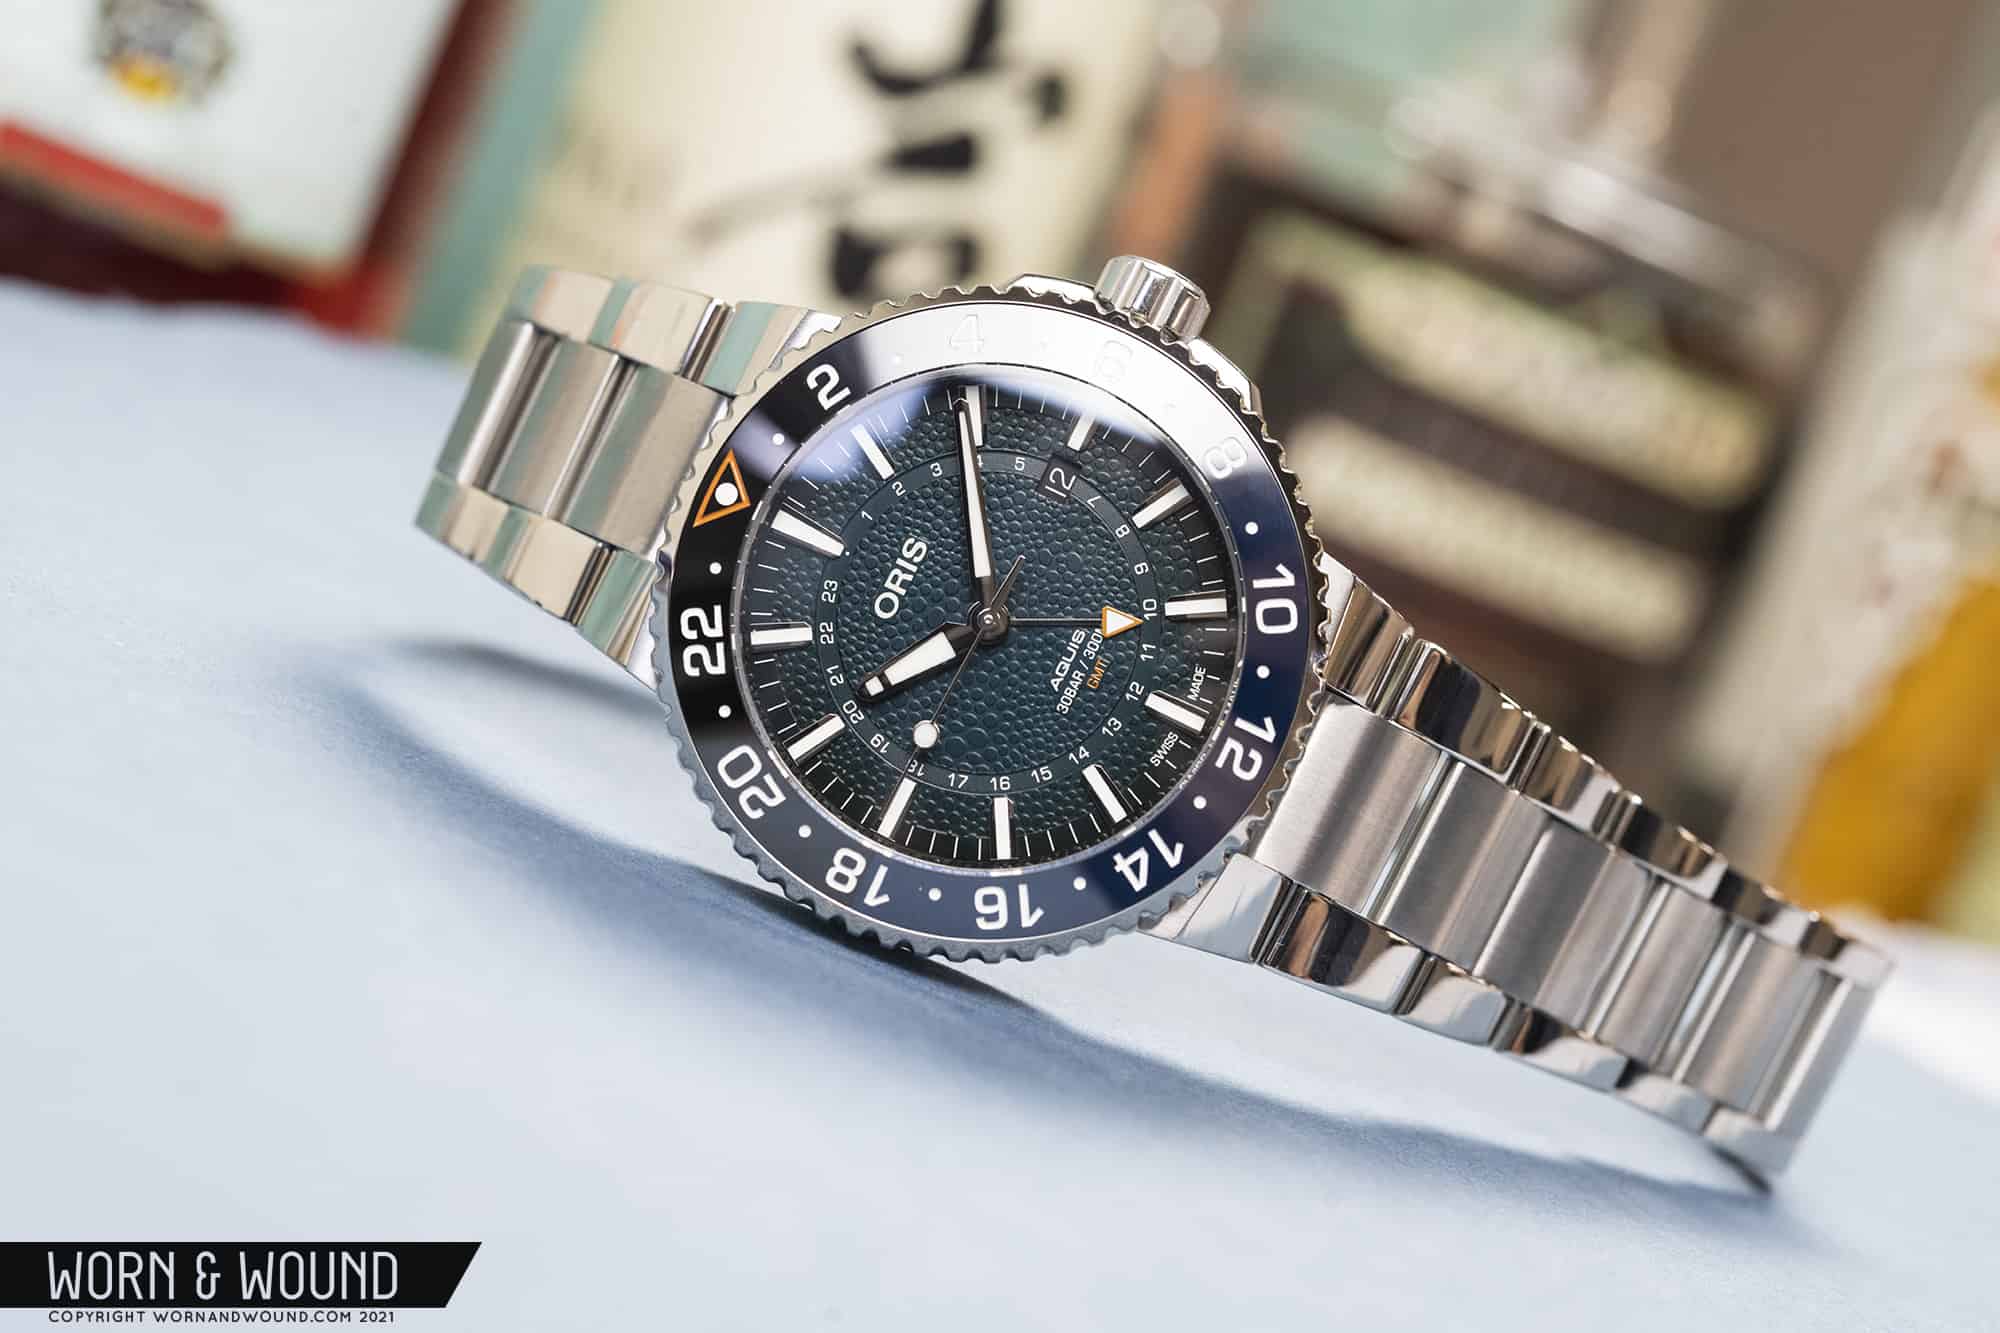 Oris Launches the Next Watch in their Change for the Better Campaign, the Whale Shark Limited Edition